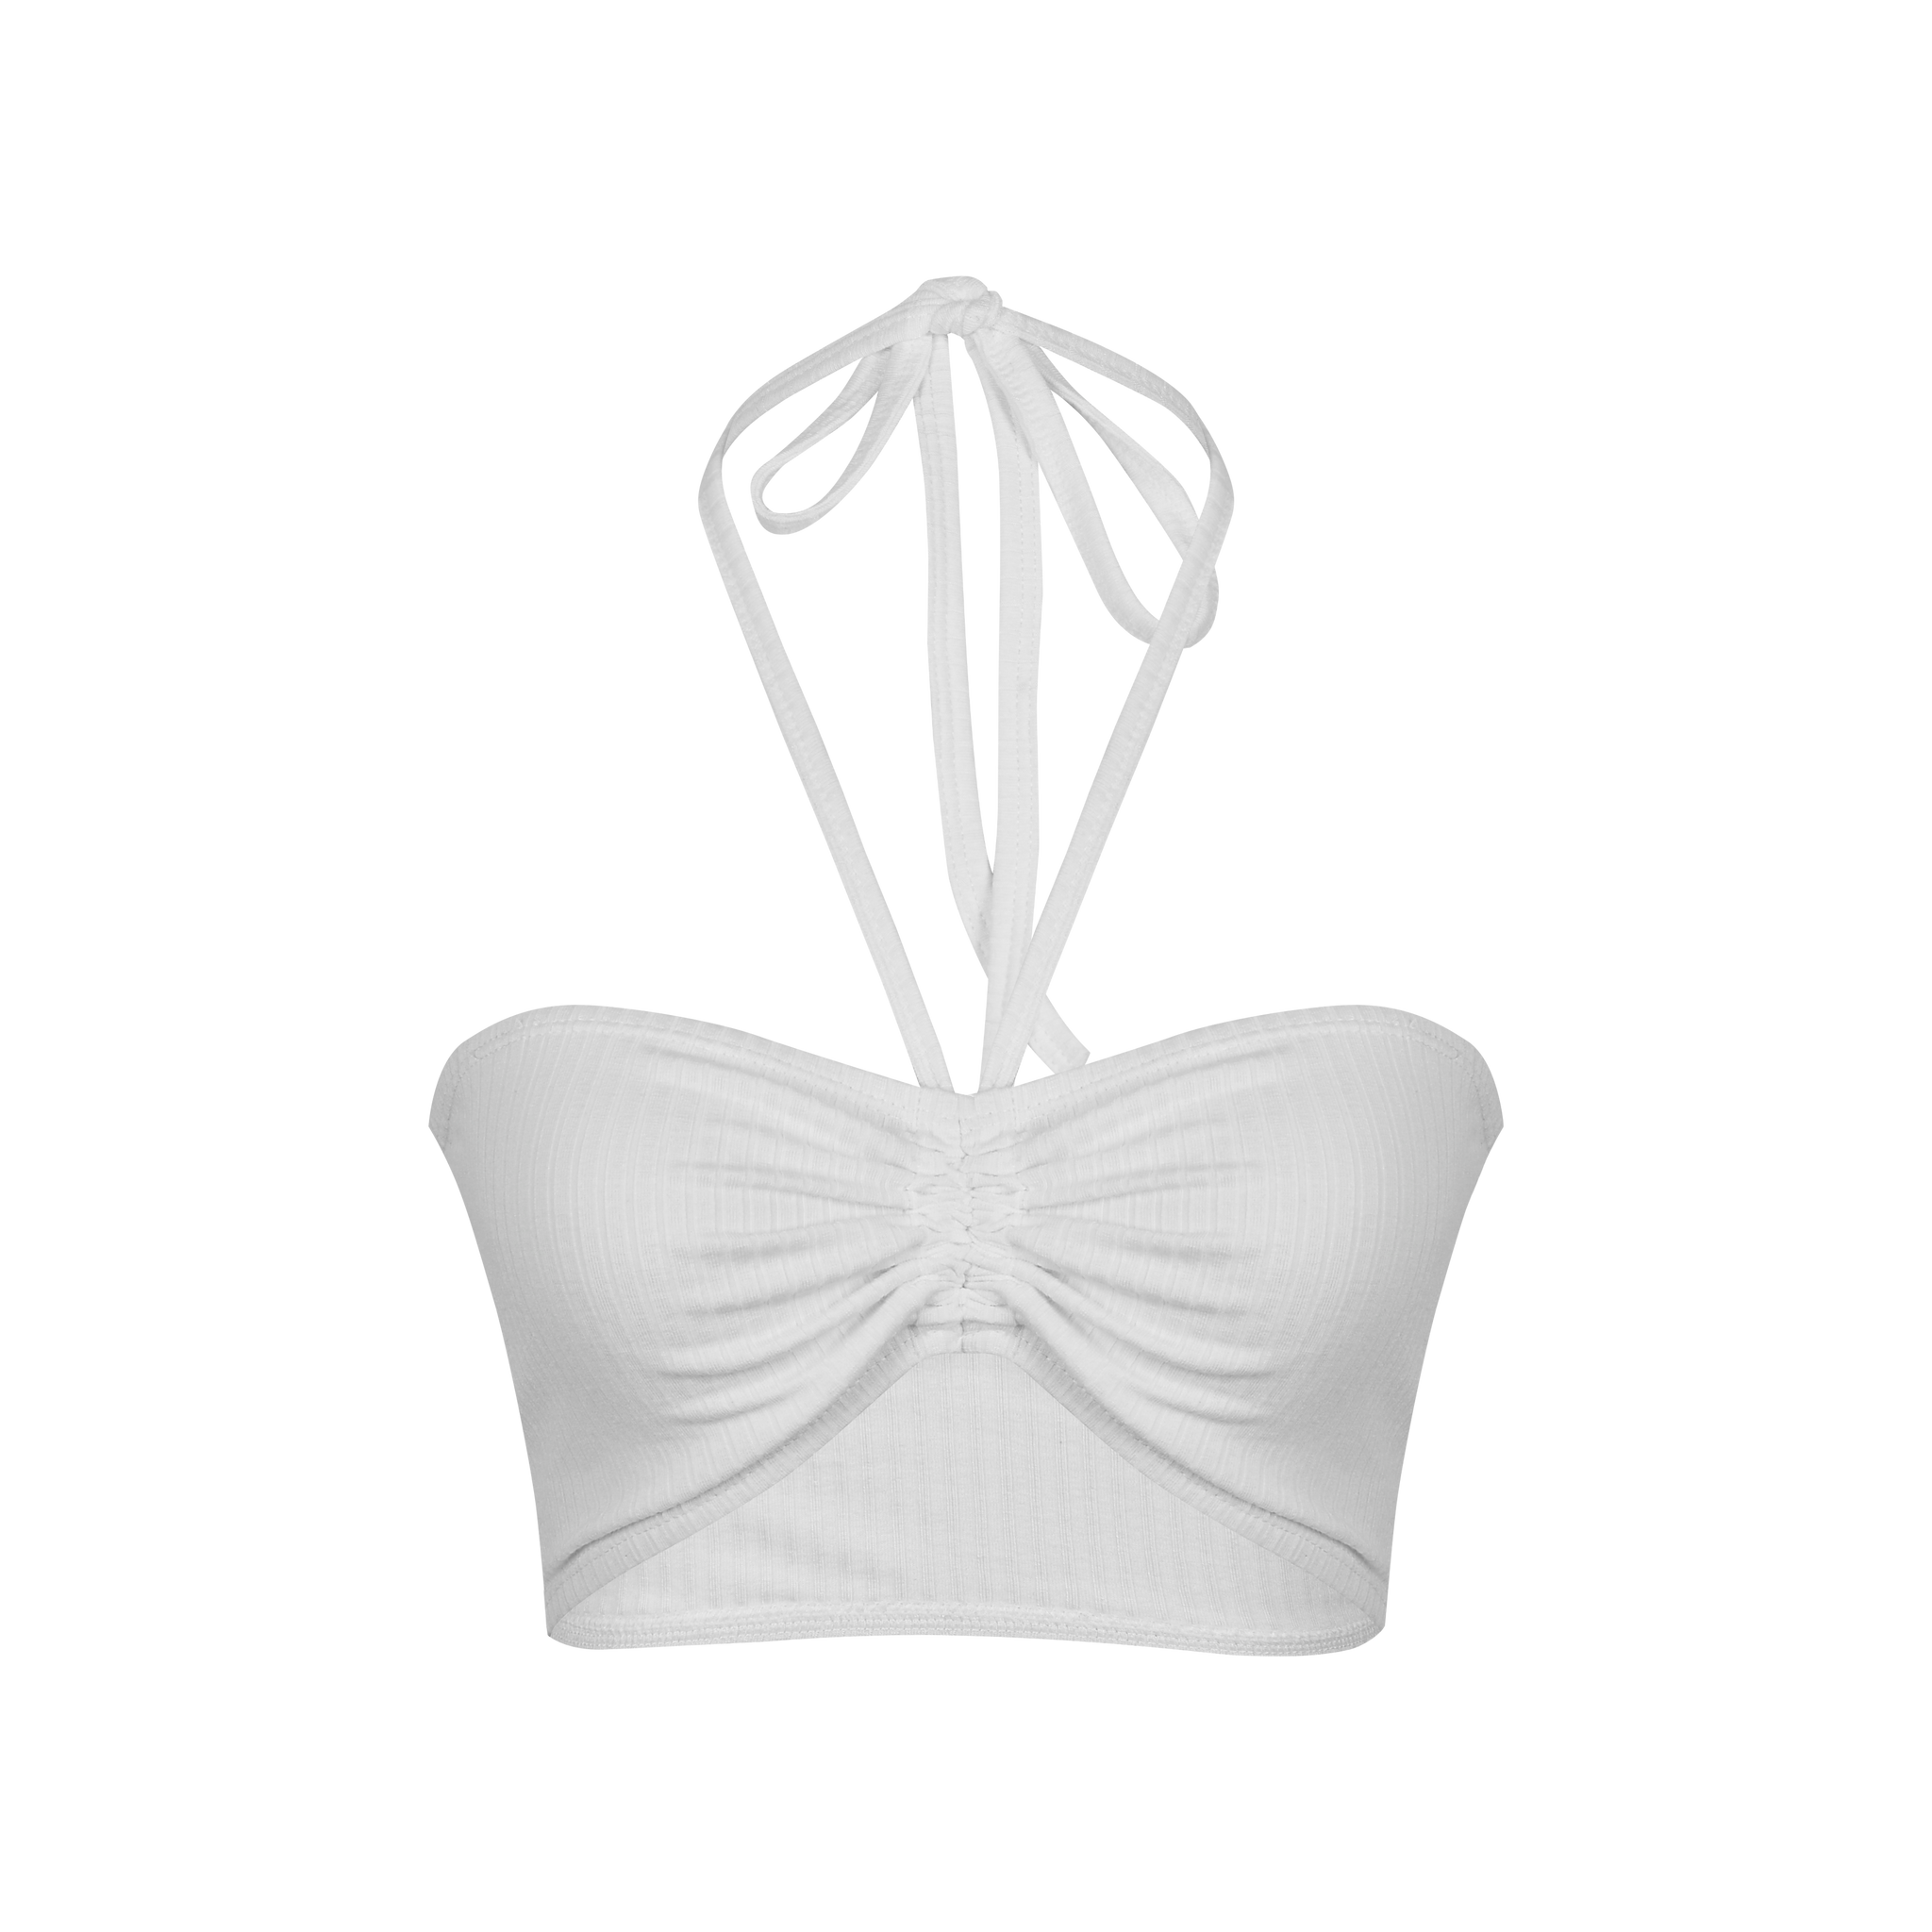 Luna Bandeau Top White - APPAREL THIS IS A LOVE SONG